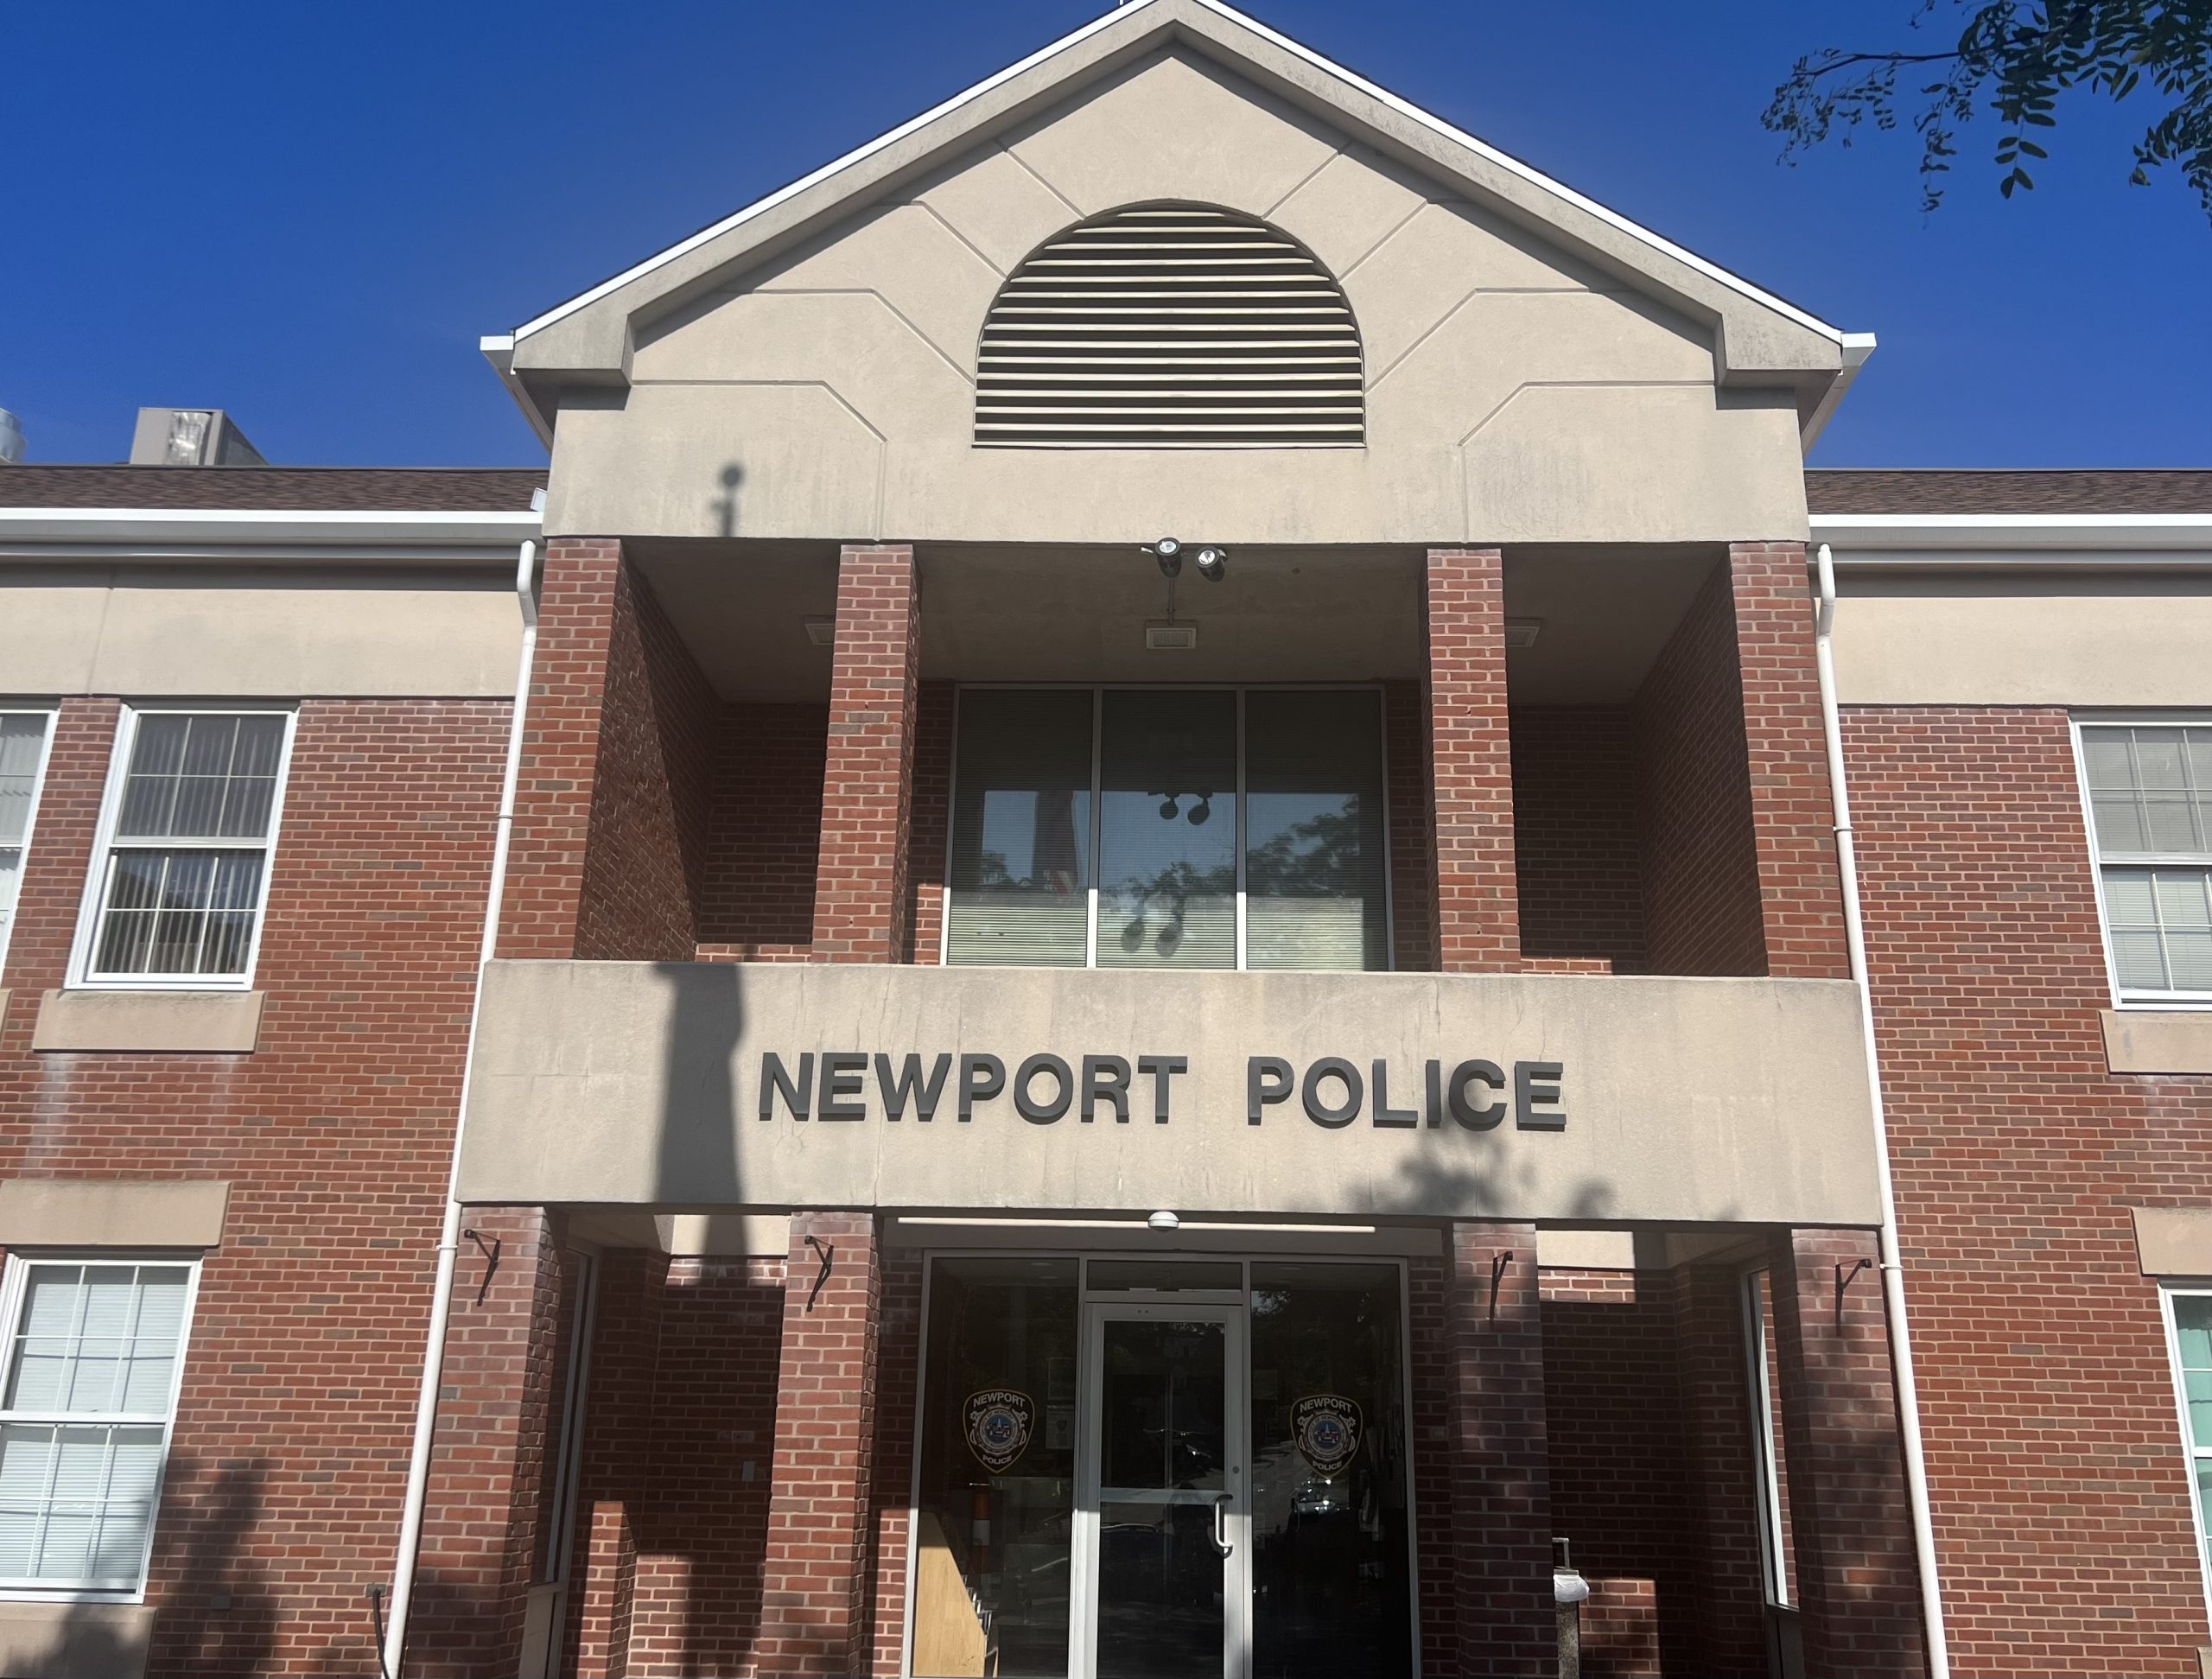  Newport Police arrest 7 individuals on various charges over the weekend 